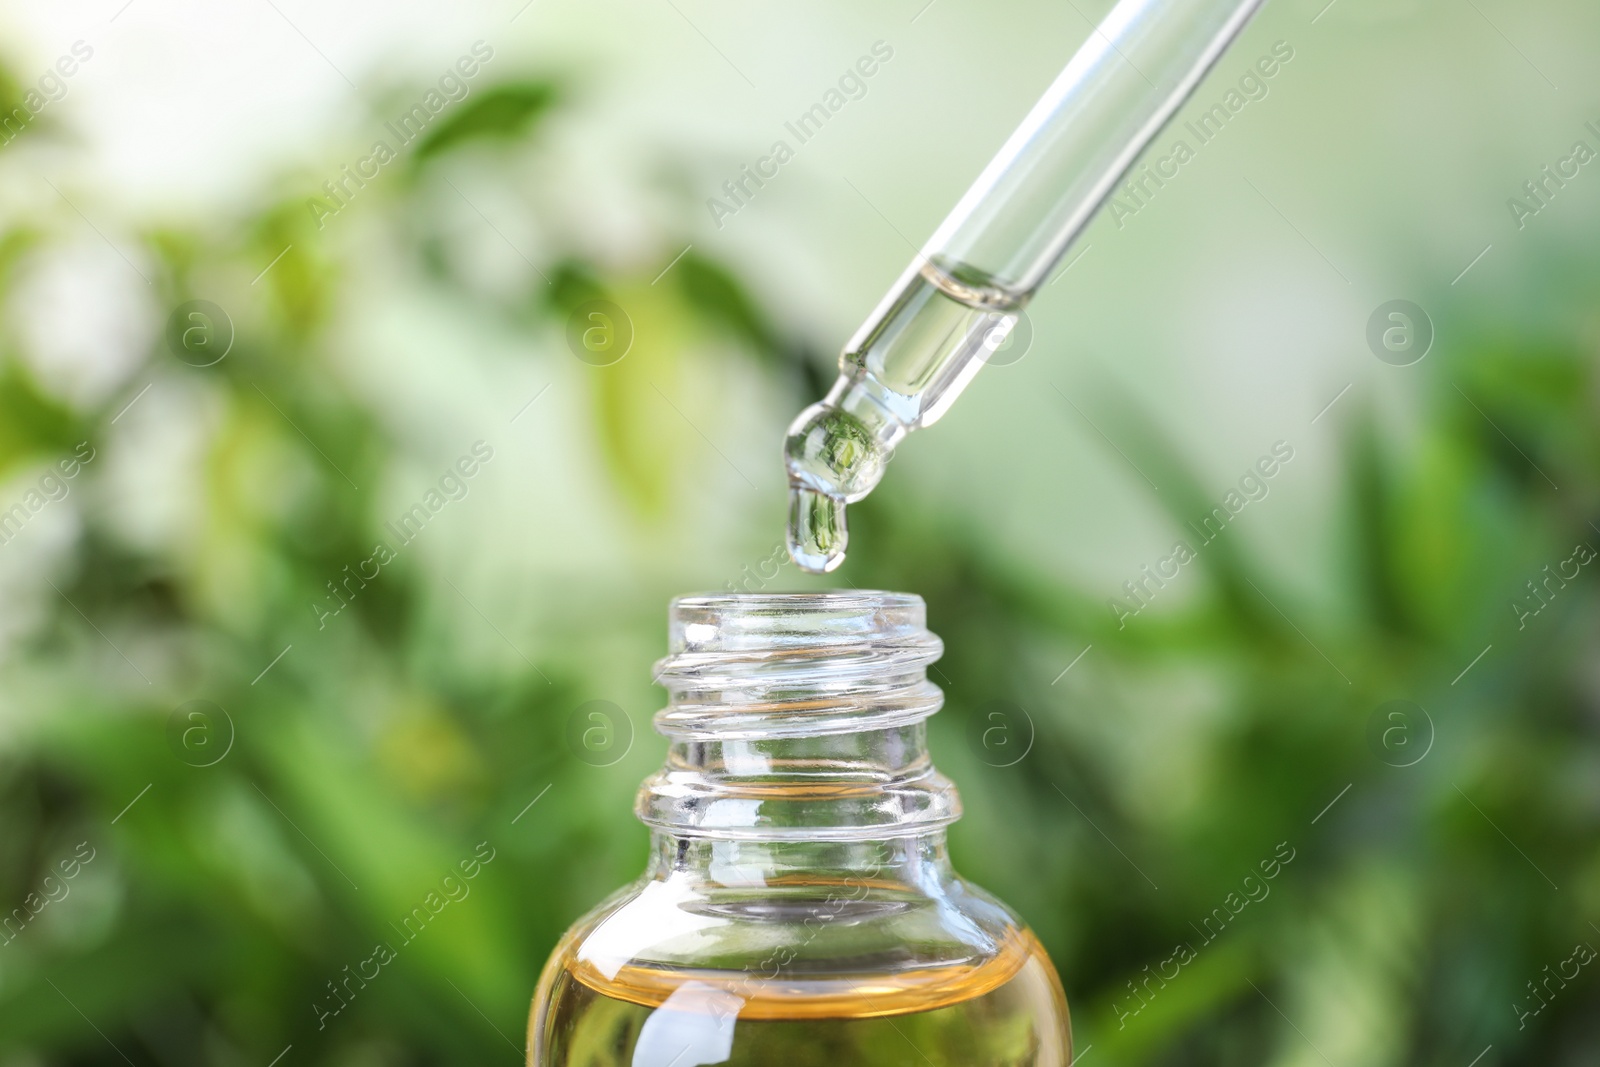 Photo of Dropping essential oil into glass bottle on blurred background, closeup